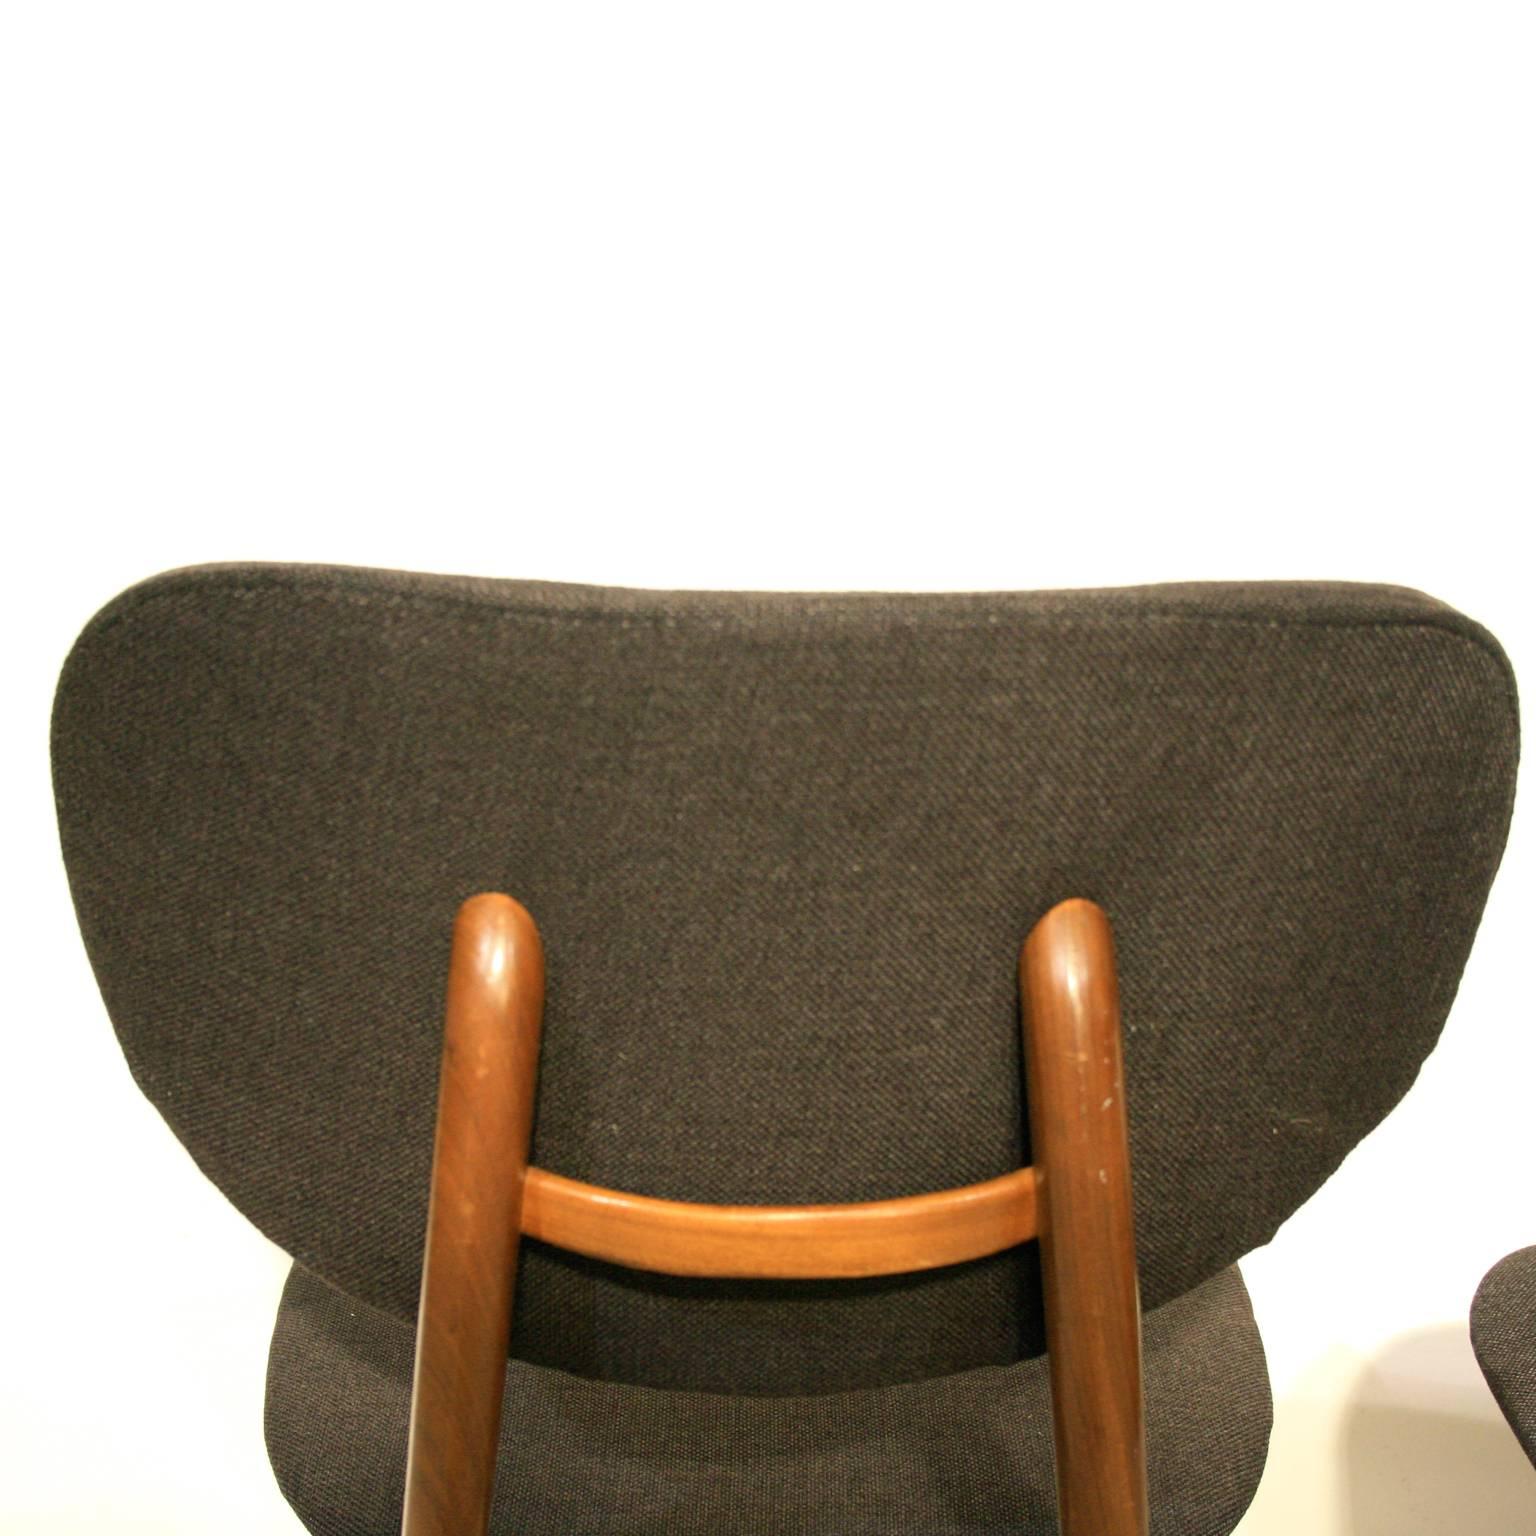 Upholstery Dining Chairs by Louis Van Teeffelen for Wébé, Dutch Design, 1950s For Sale